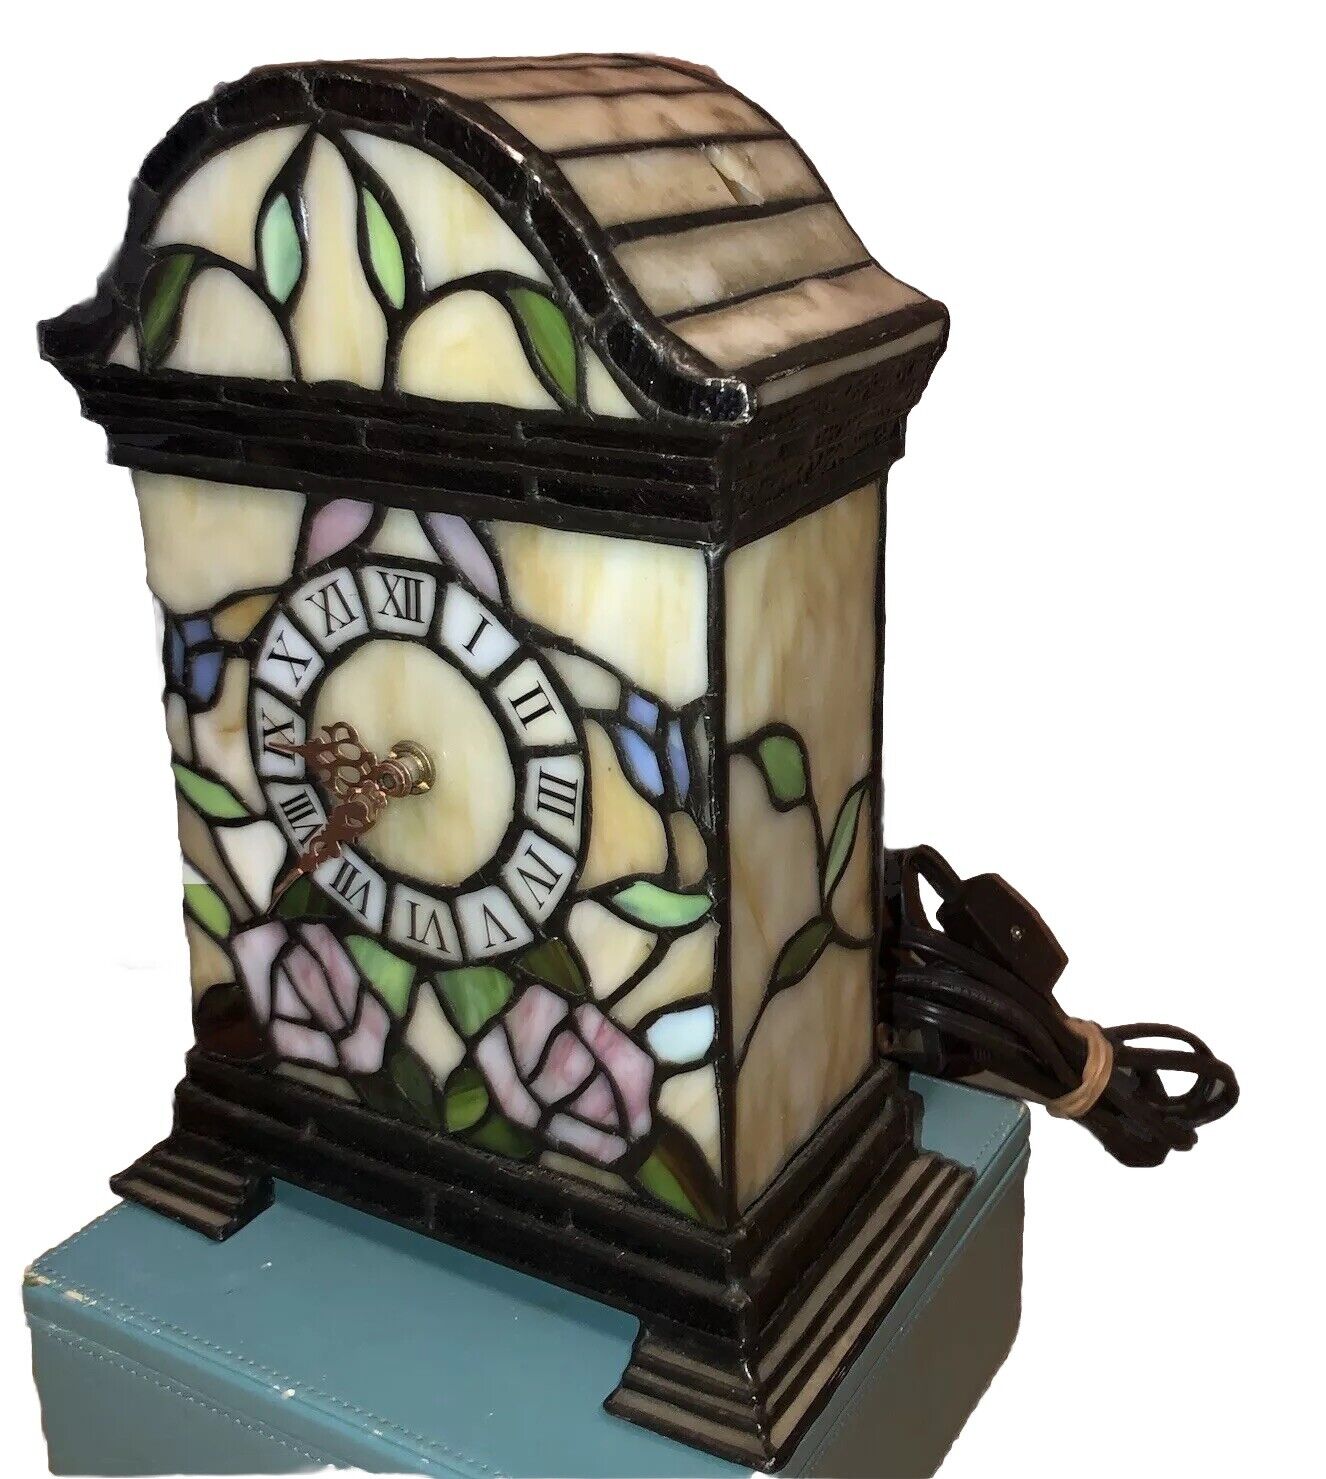 Stained glass 10.5” mantle clock Lamp Lights Up Tiffany style Flowers Nice